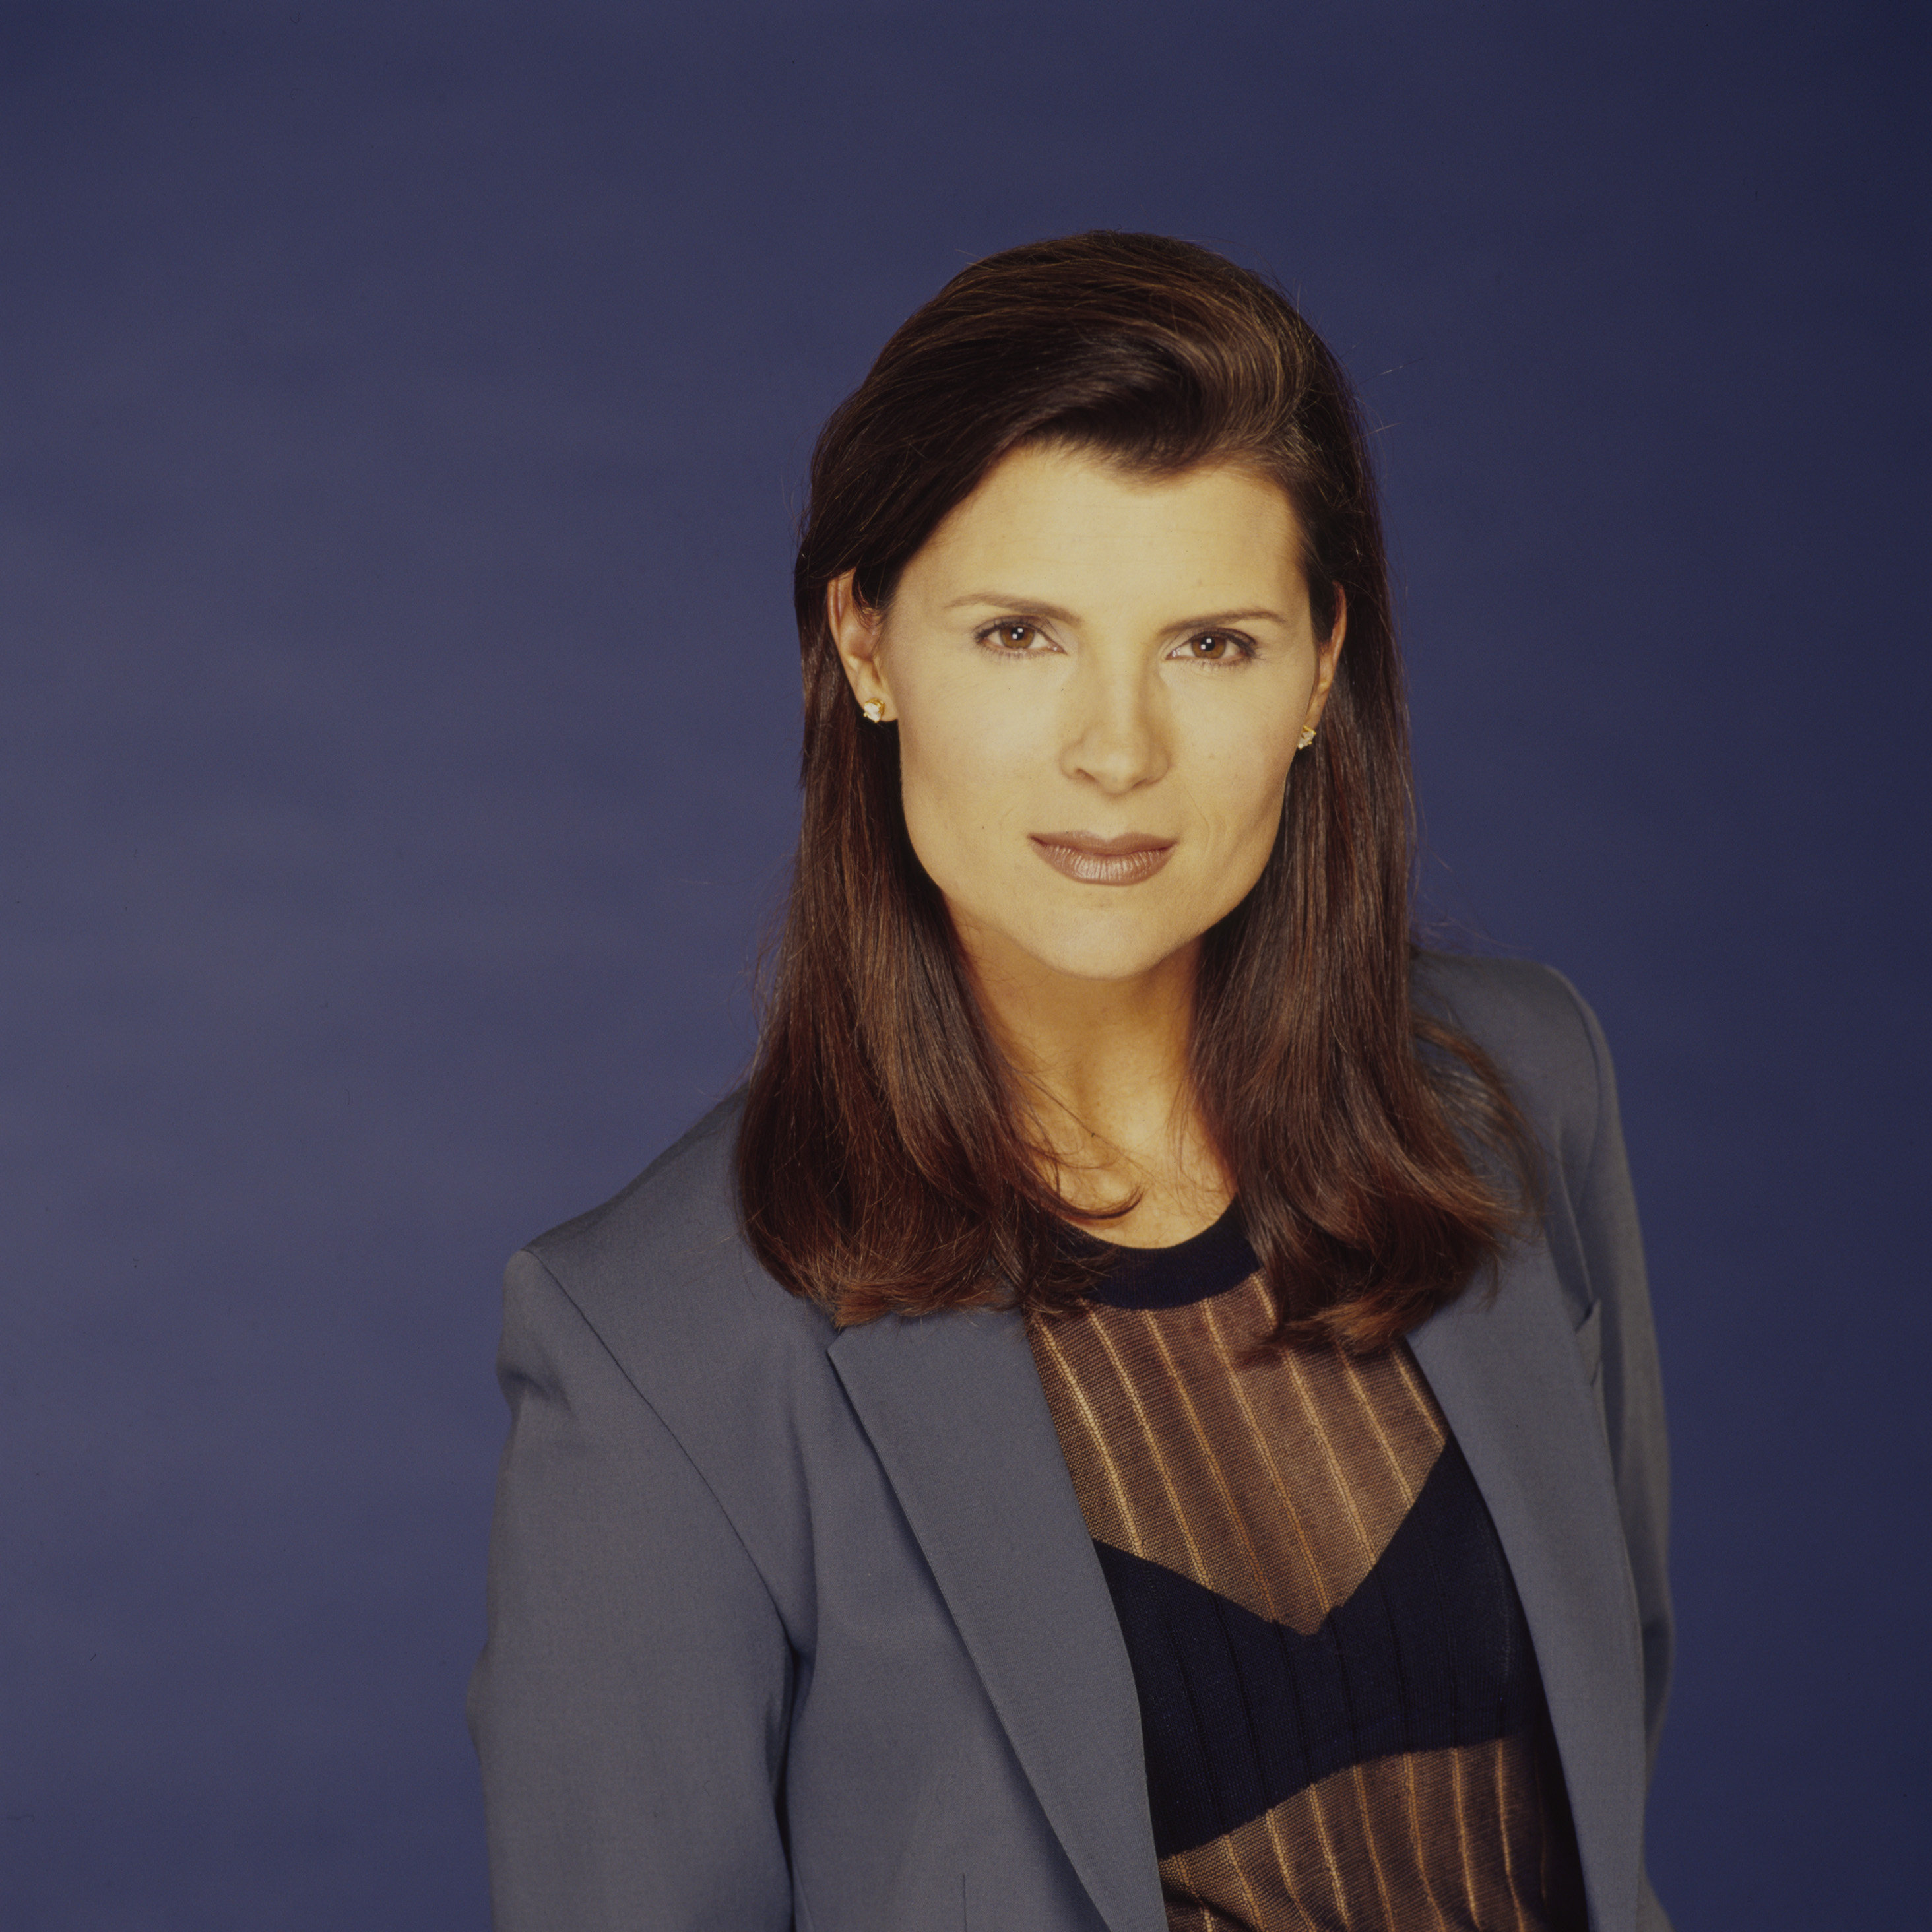 'The Bold and the Beautiful' actor Kimberlin Brown wearing a blue suit and posing in front of a blue backdrop.